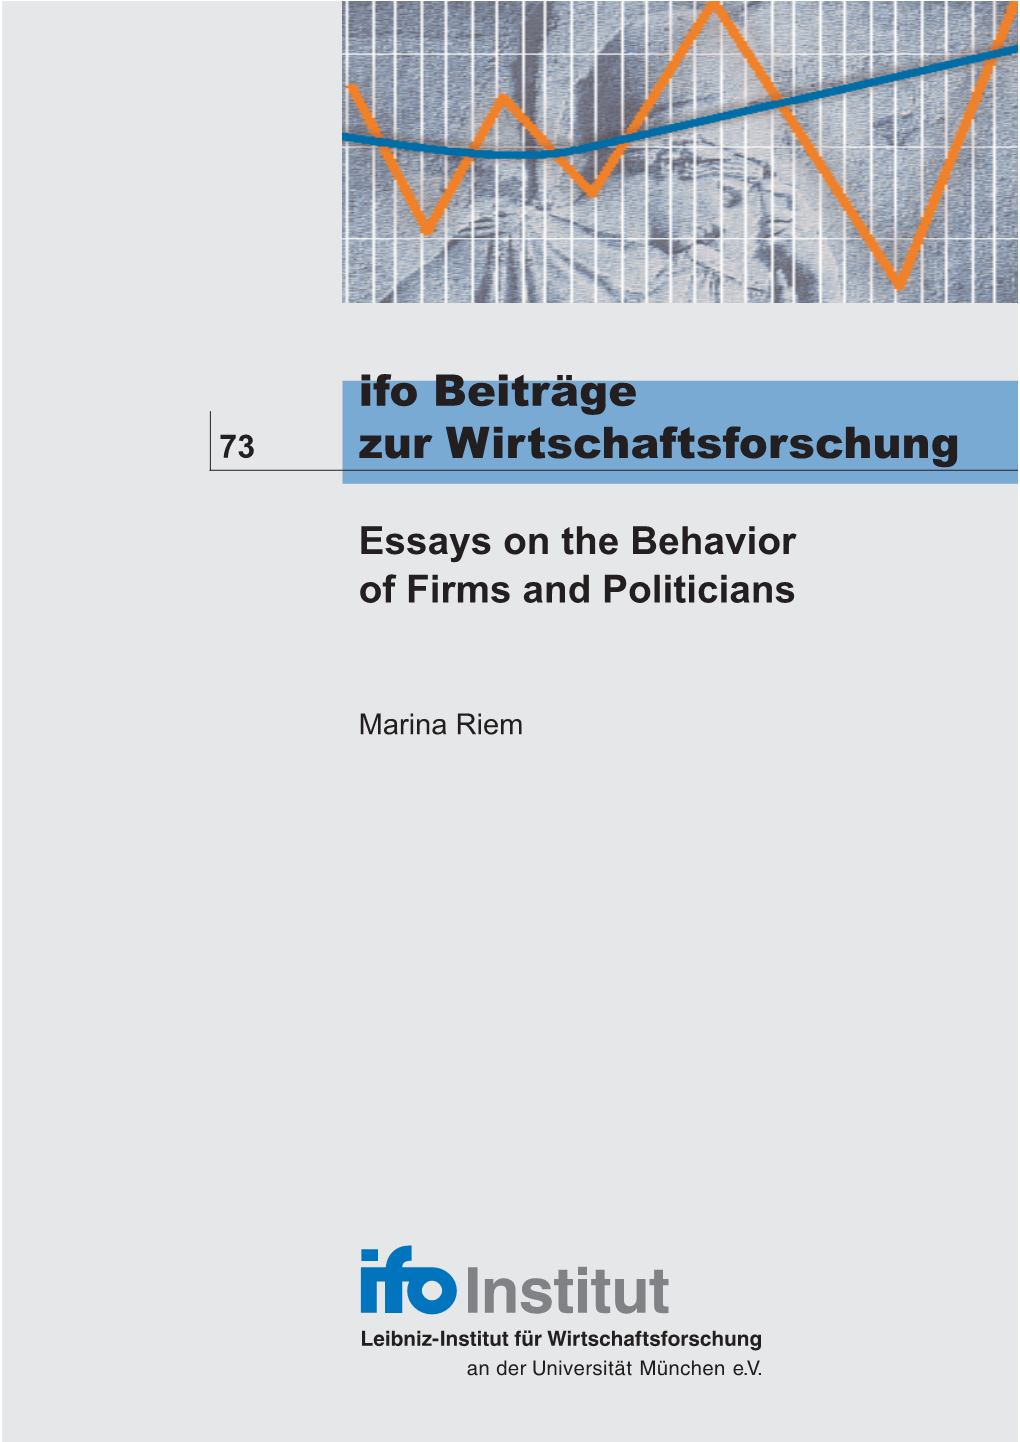 Essays on the Behavior of Firms and Politicians